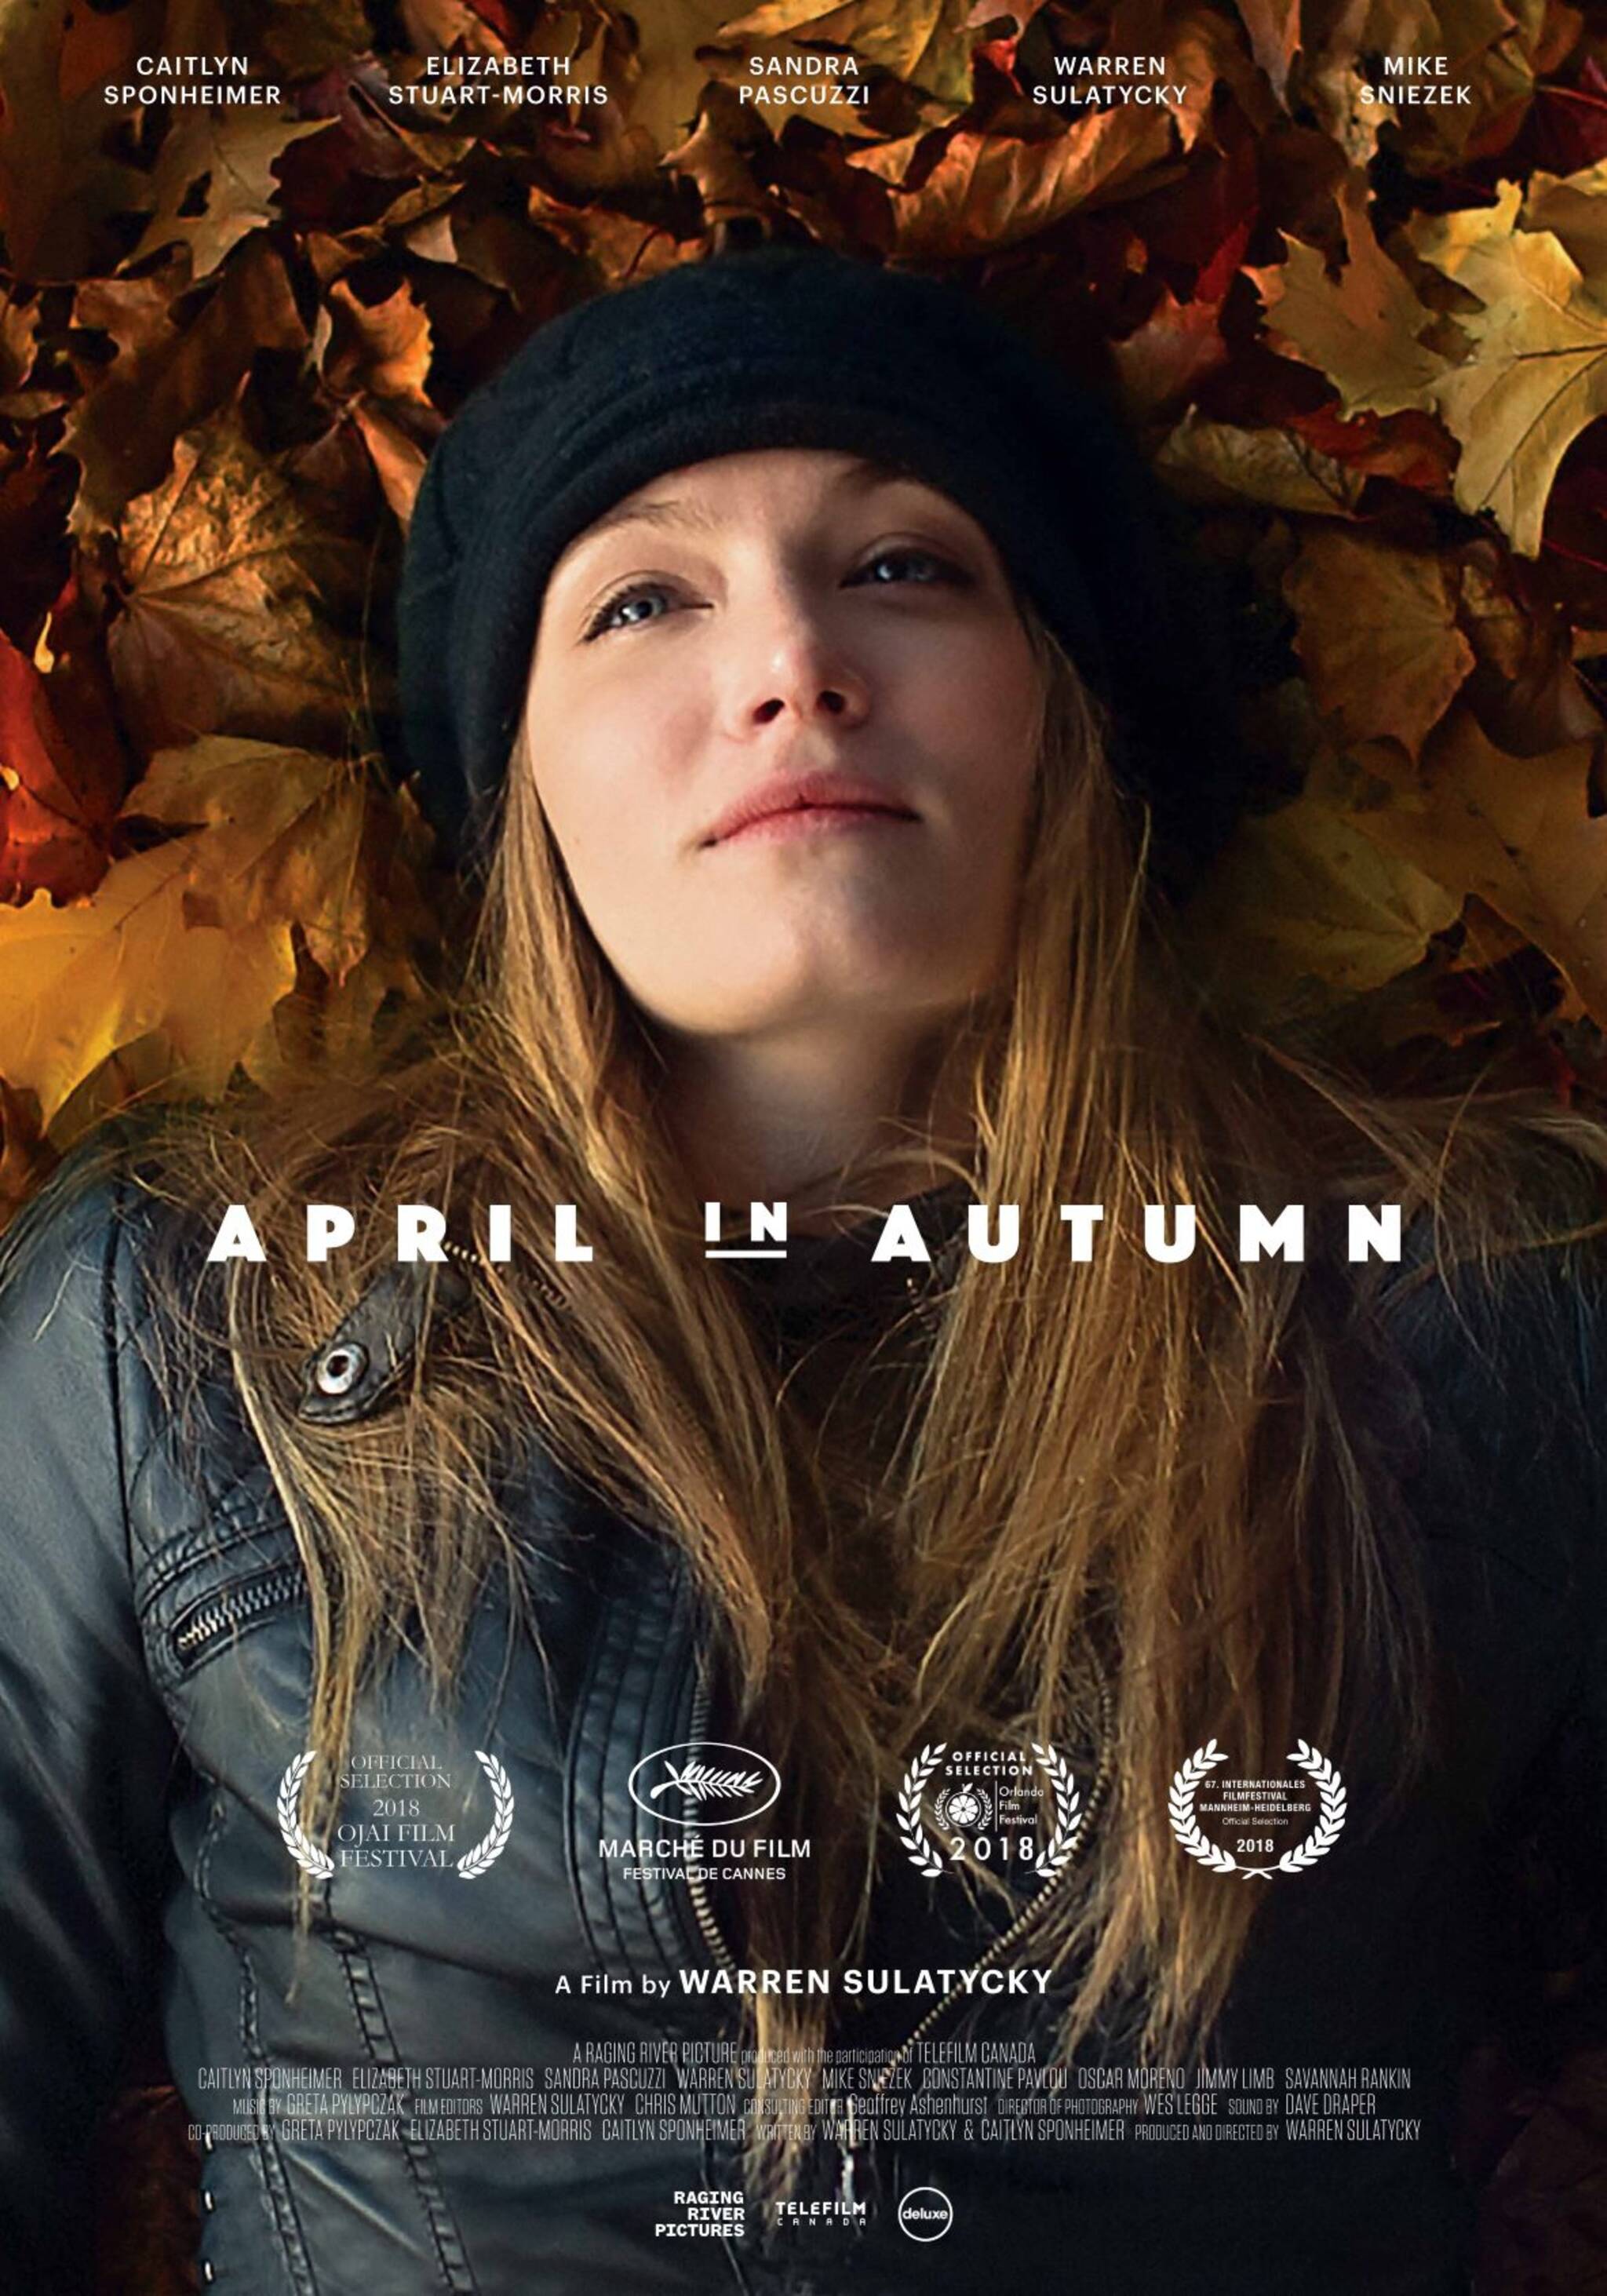 New Canadian film APRIL IN AUTUMN with Q&A